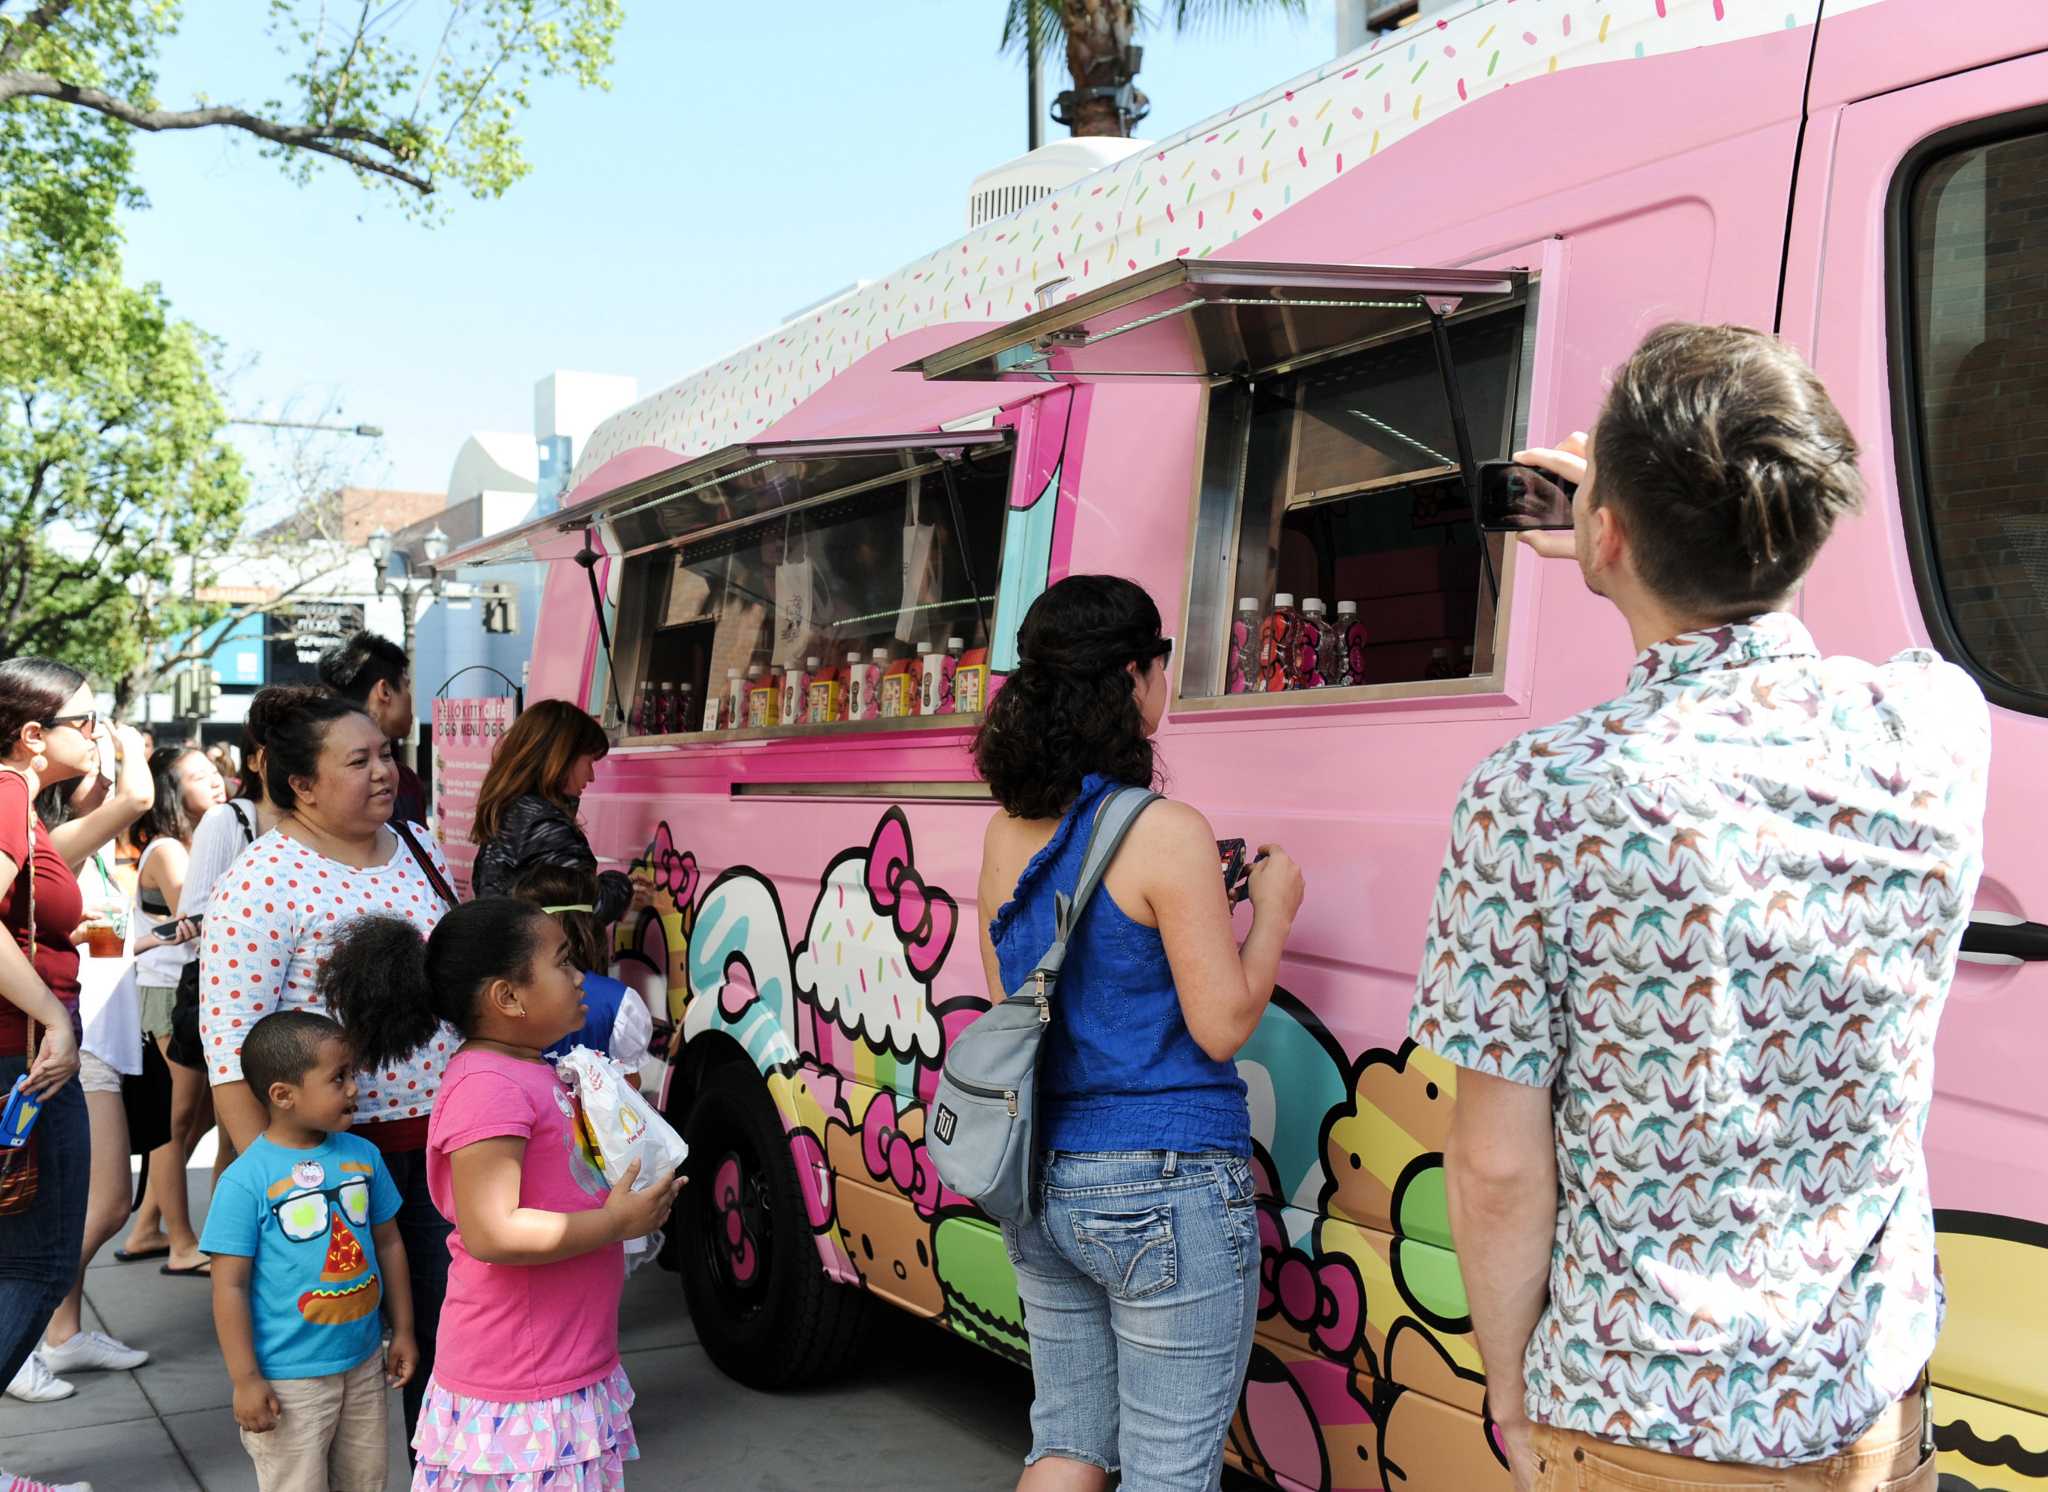 Hello Kitty Cafe Truck is rolling into Las Vegas